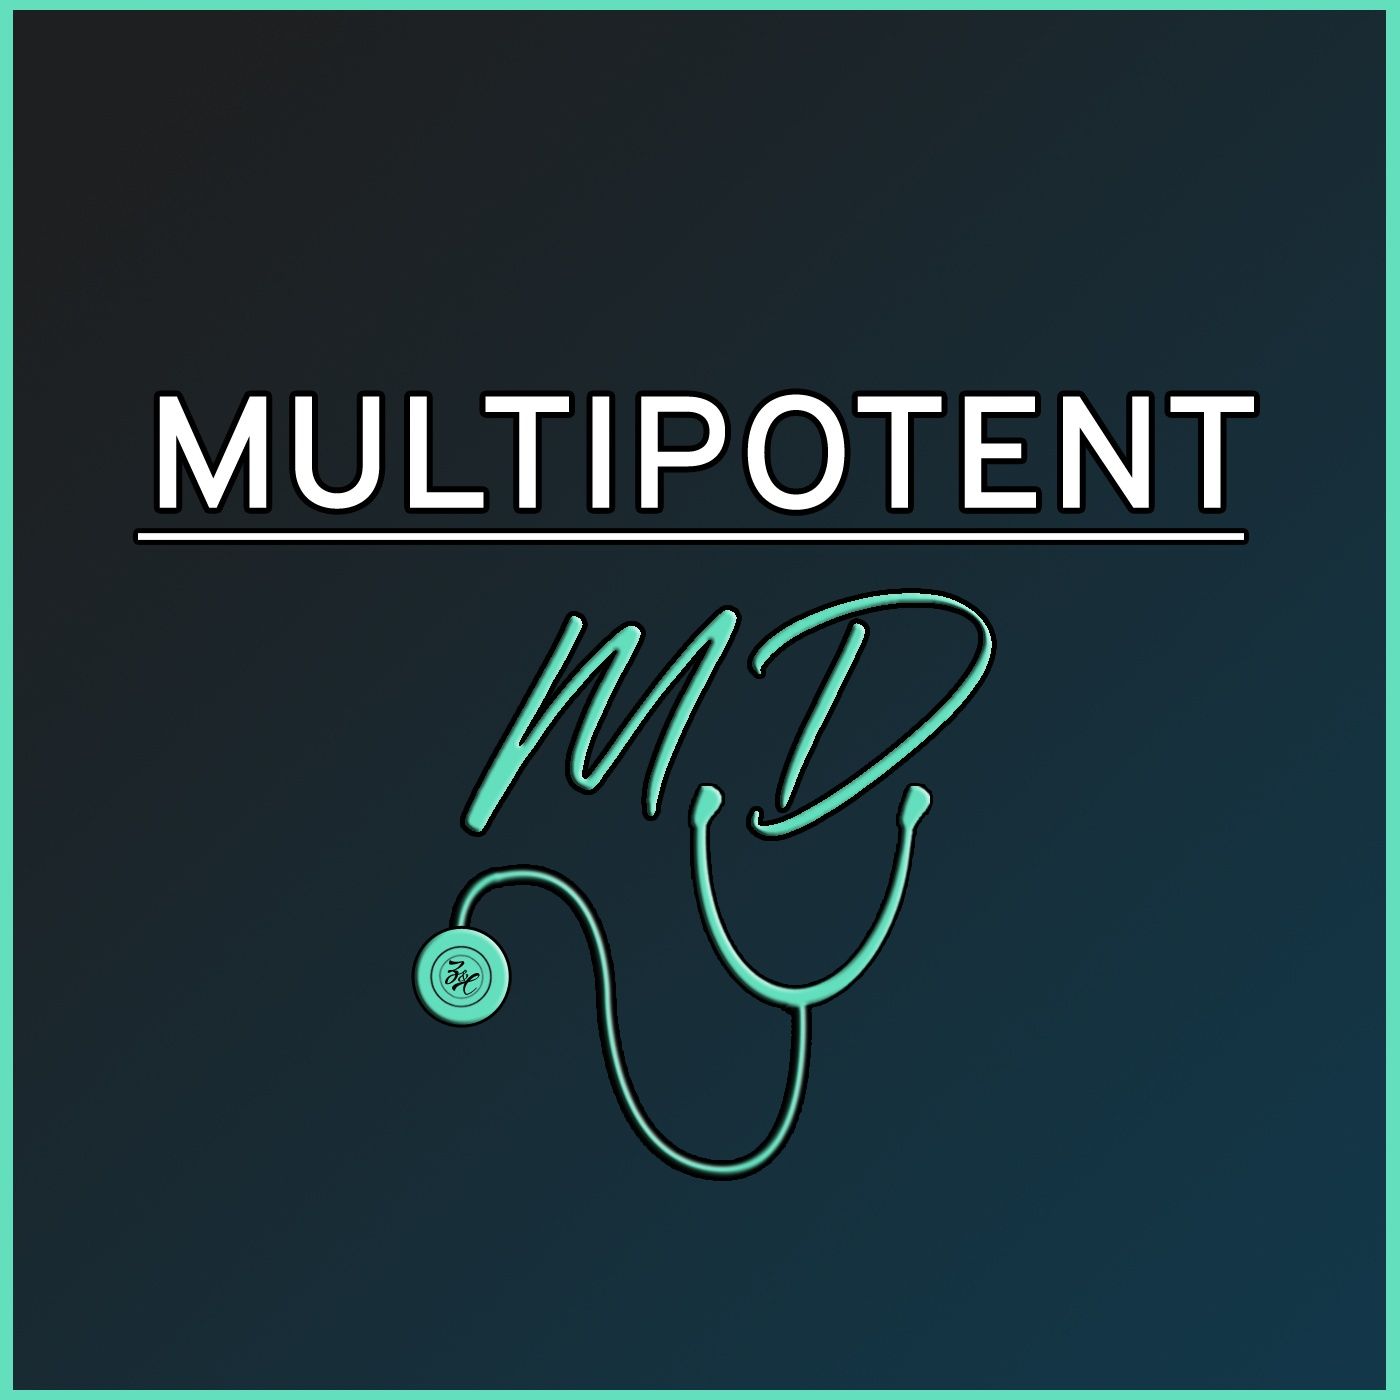 Multipotent MD 2019 Wrap-up